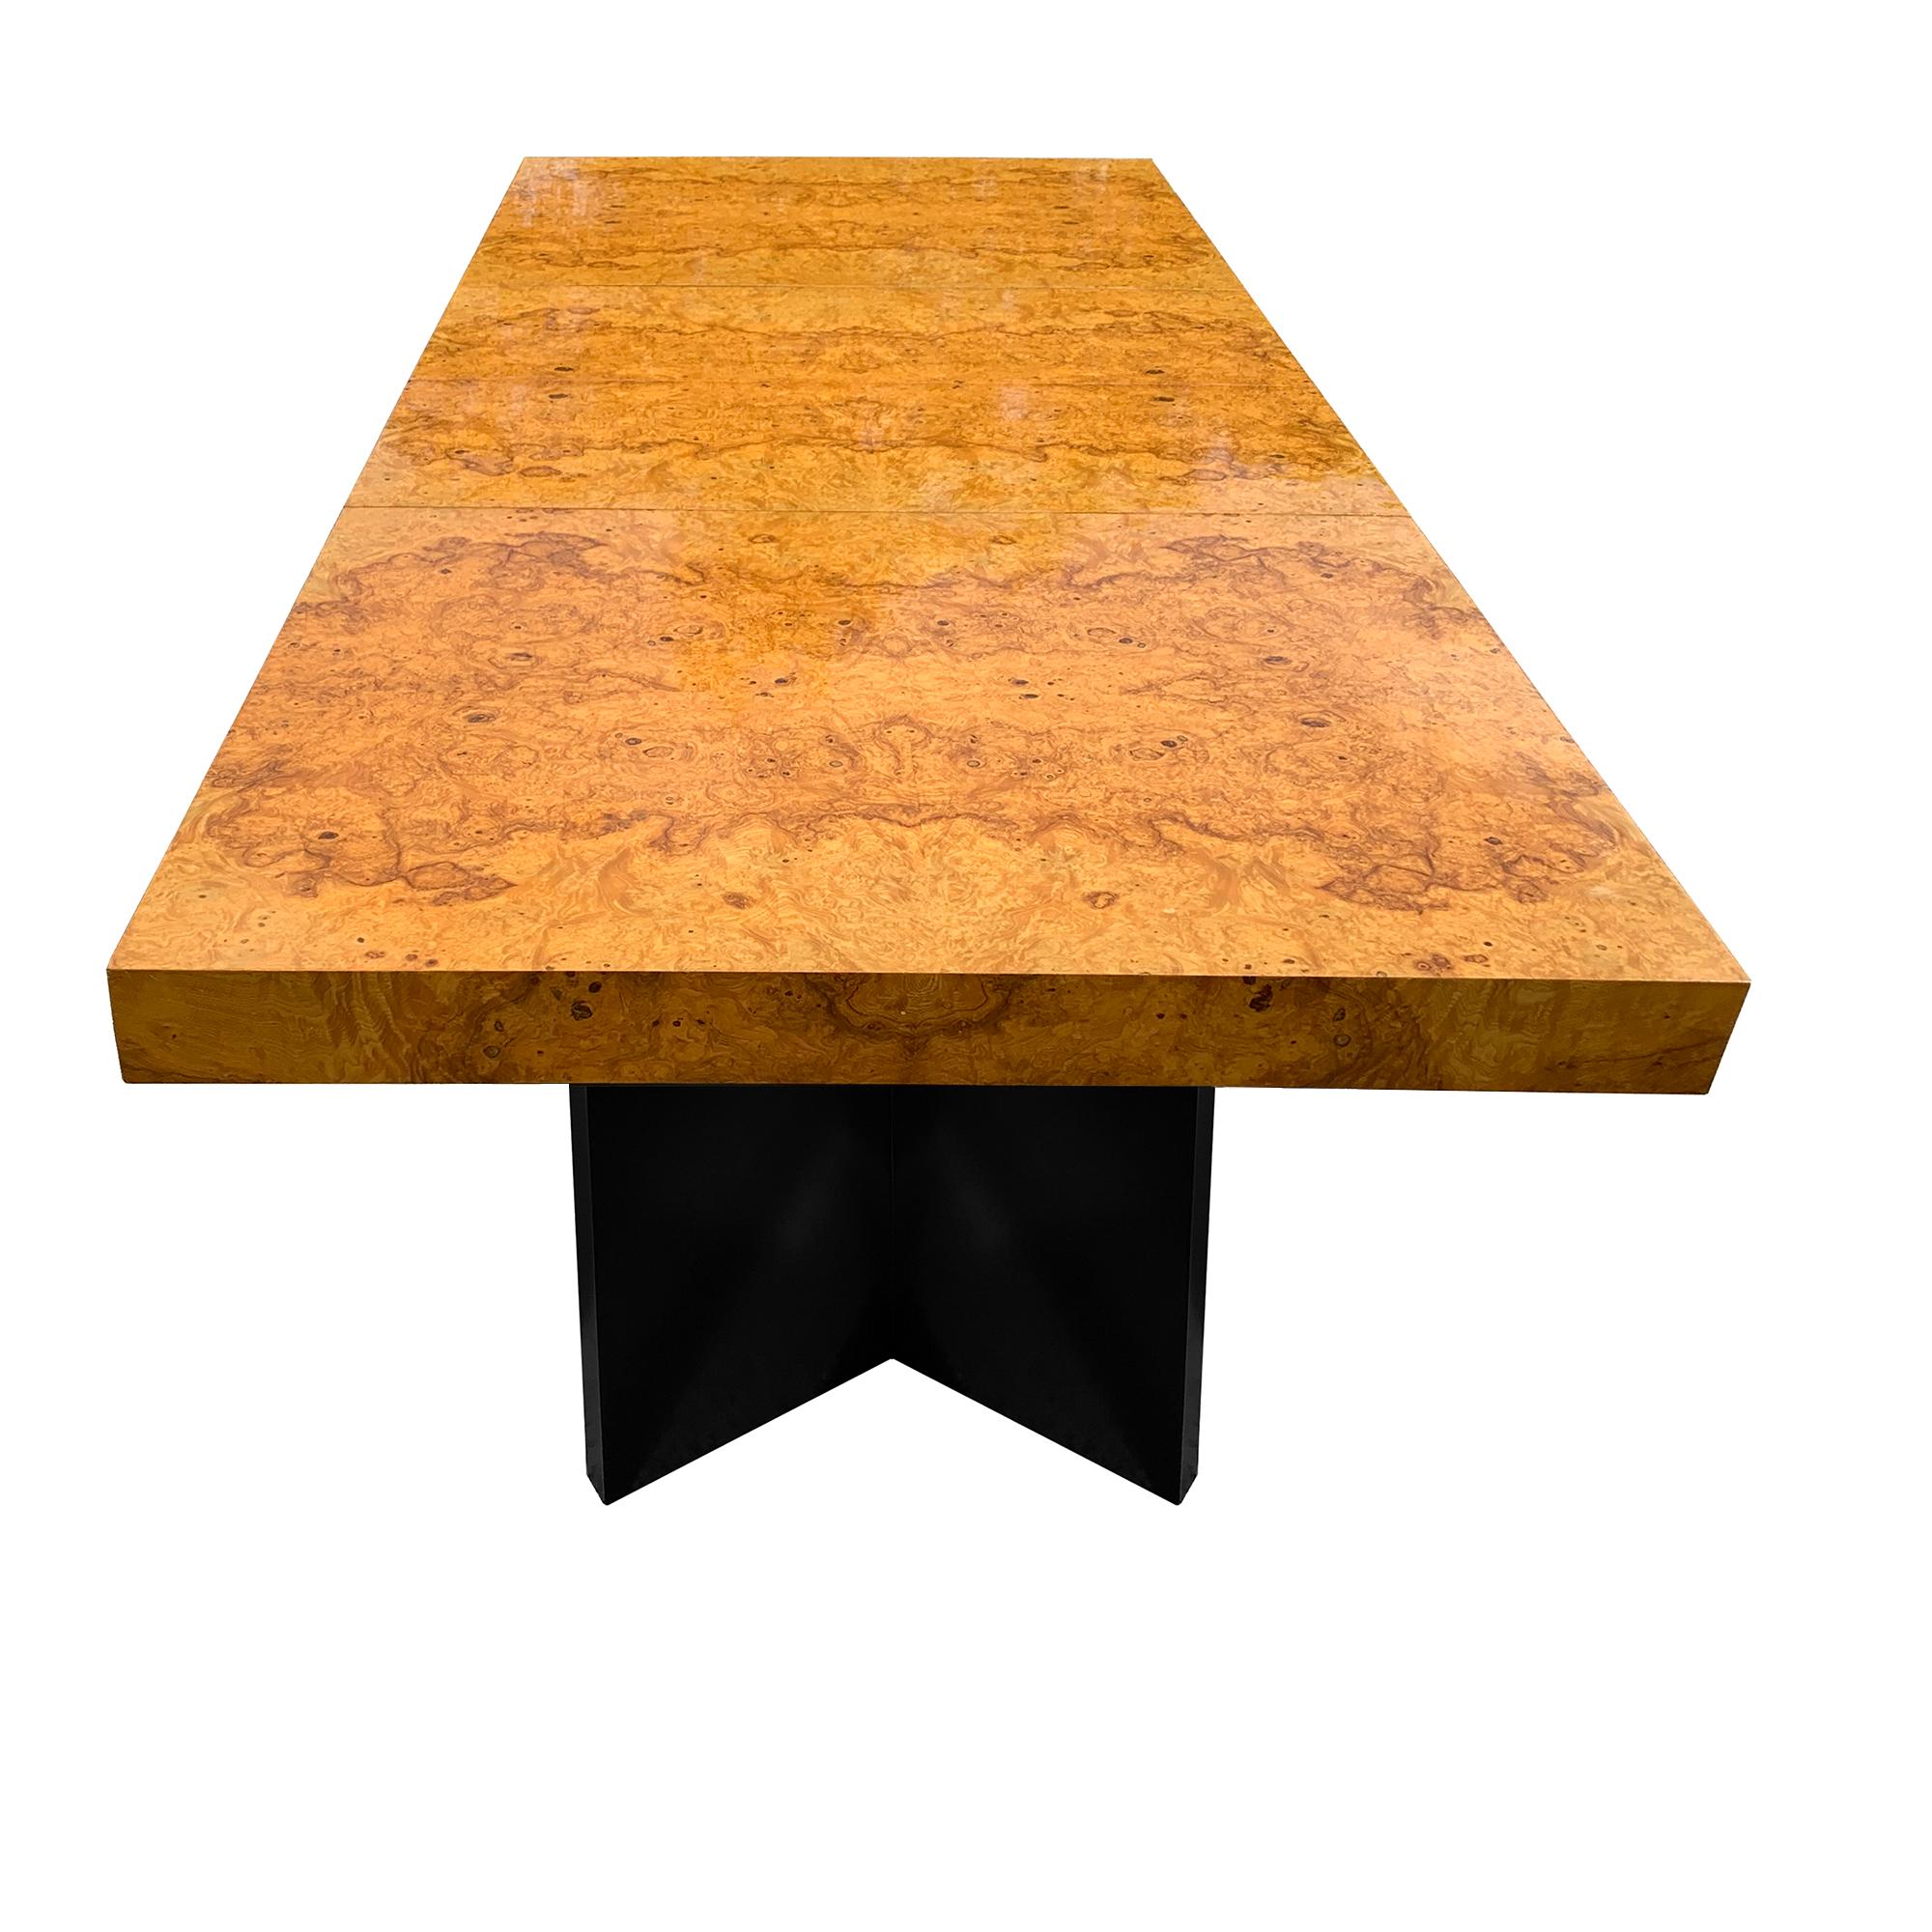 Gorgeous 1970s olive burl wood top extension dining table with black mid-century modern dual V shaped pedestal bases. Includes 2 leaves. The top is glossy and shows reflections in the photos. This table seats 6 without leaves, 8 with 1 leaf inserted